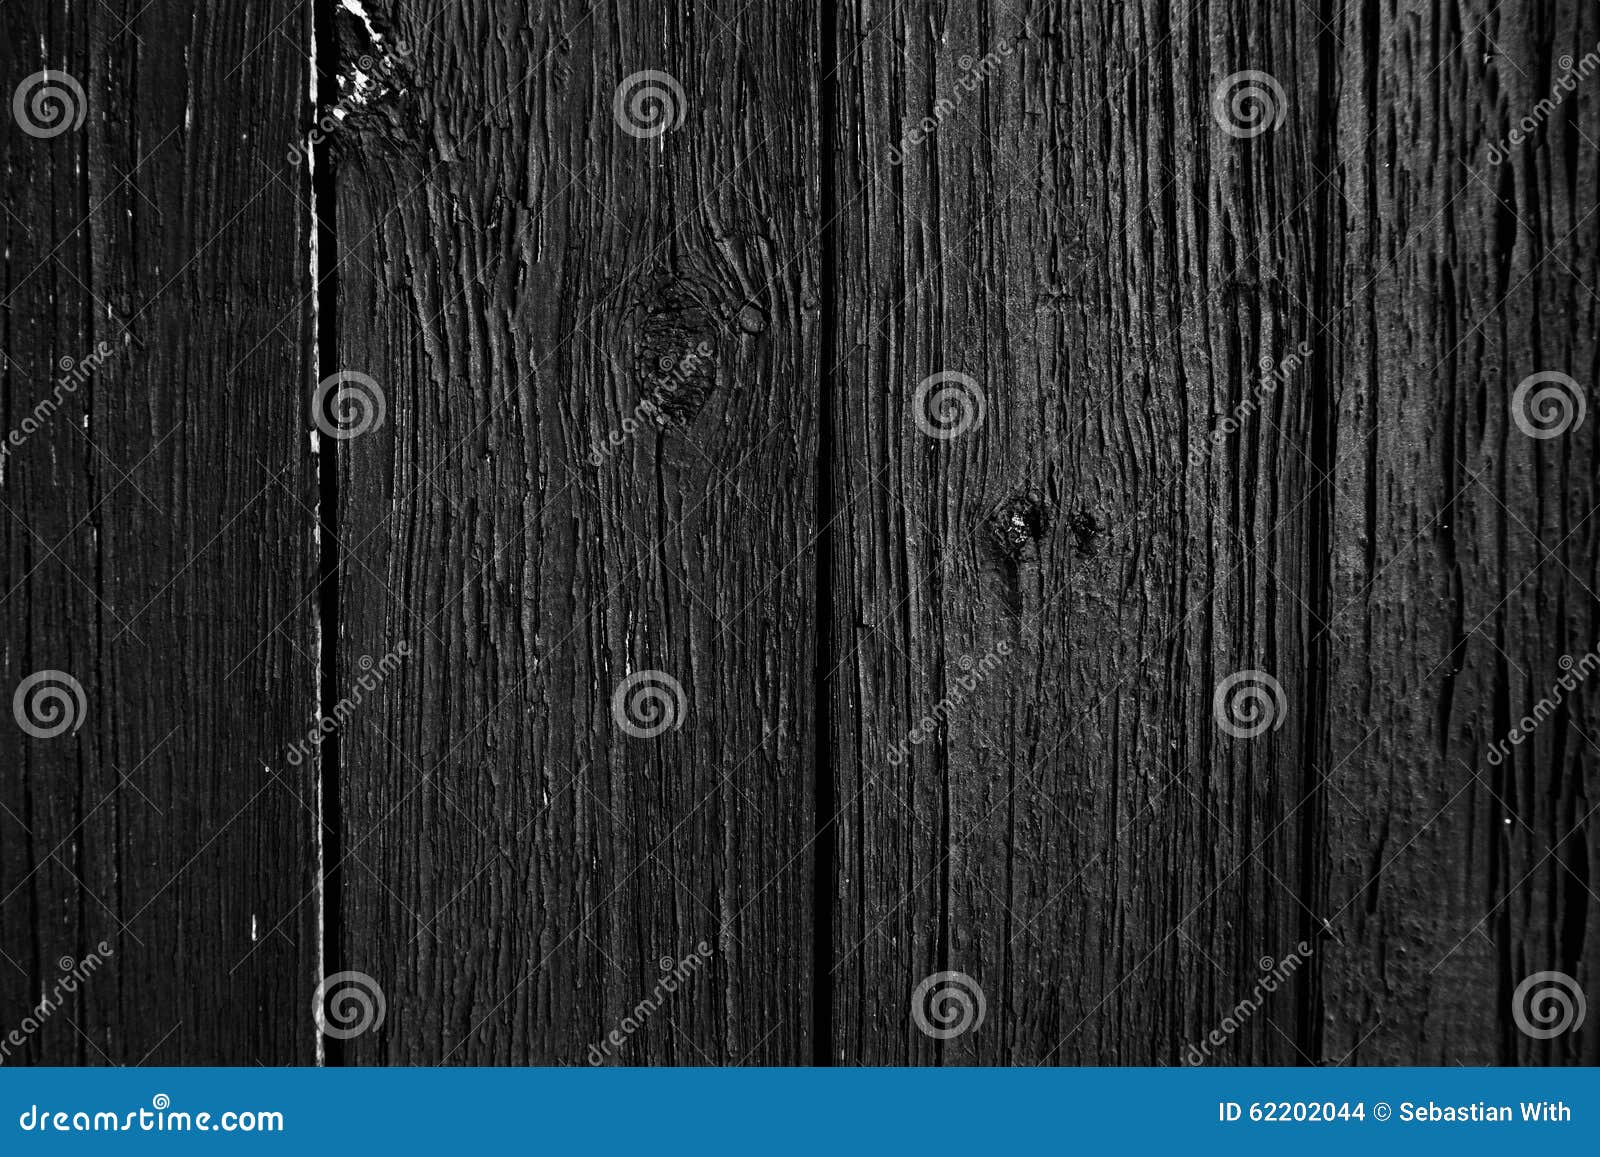 Black Abstract Wood Panel stock photo. Image of material - 62202044